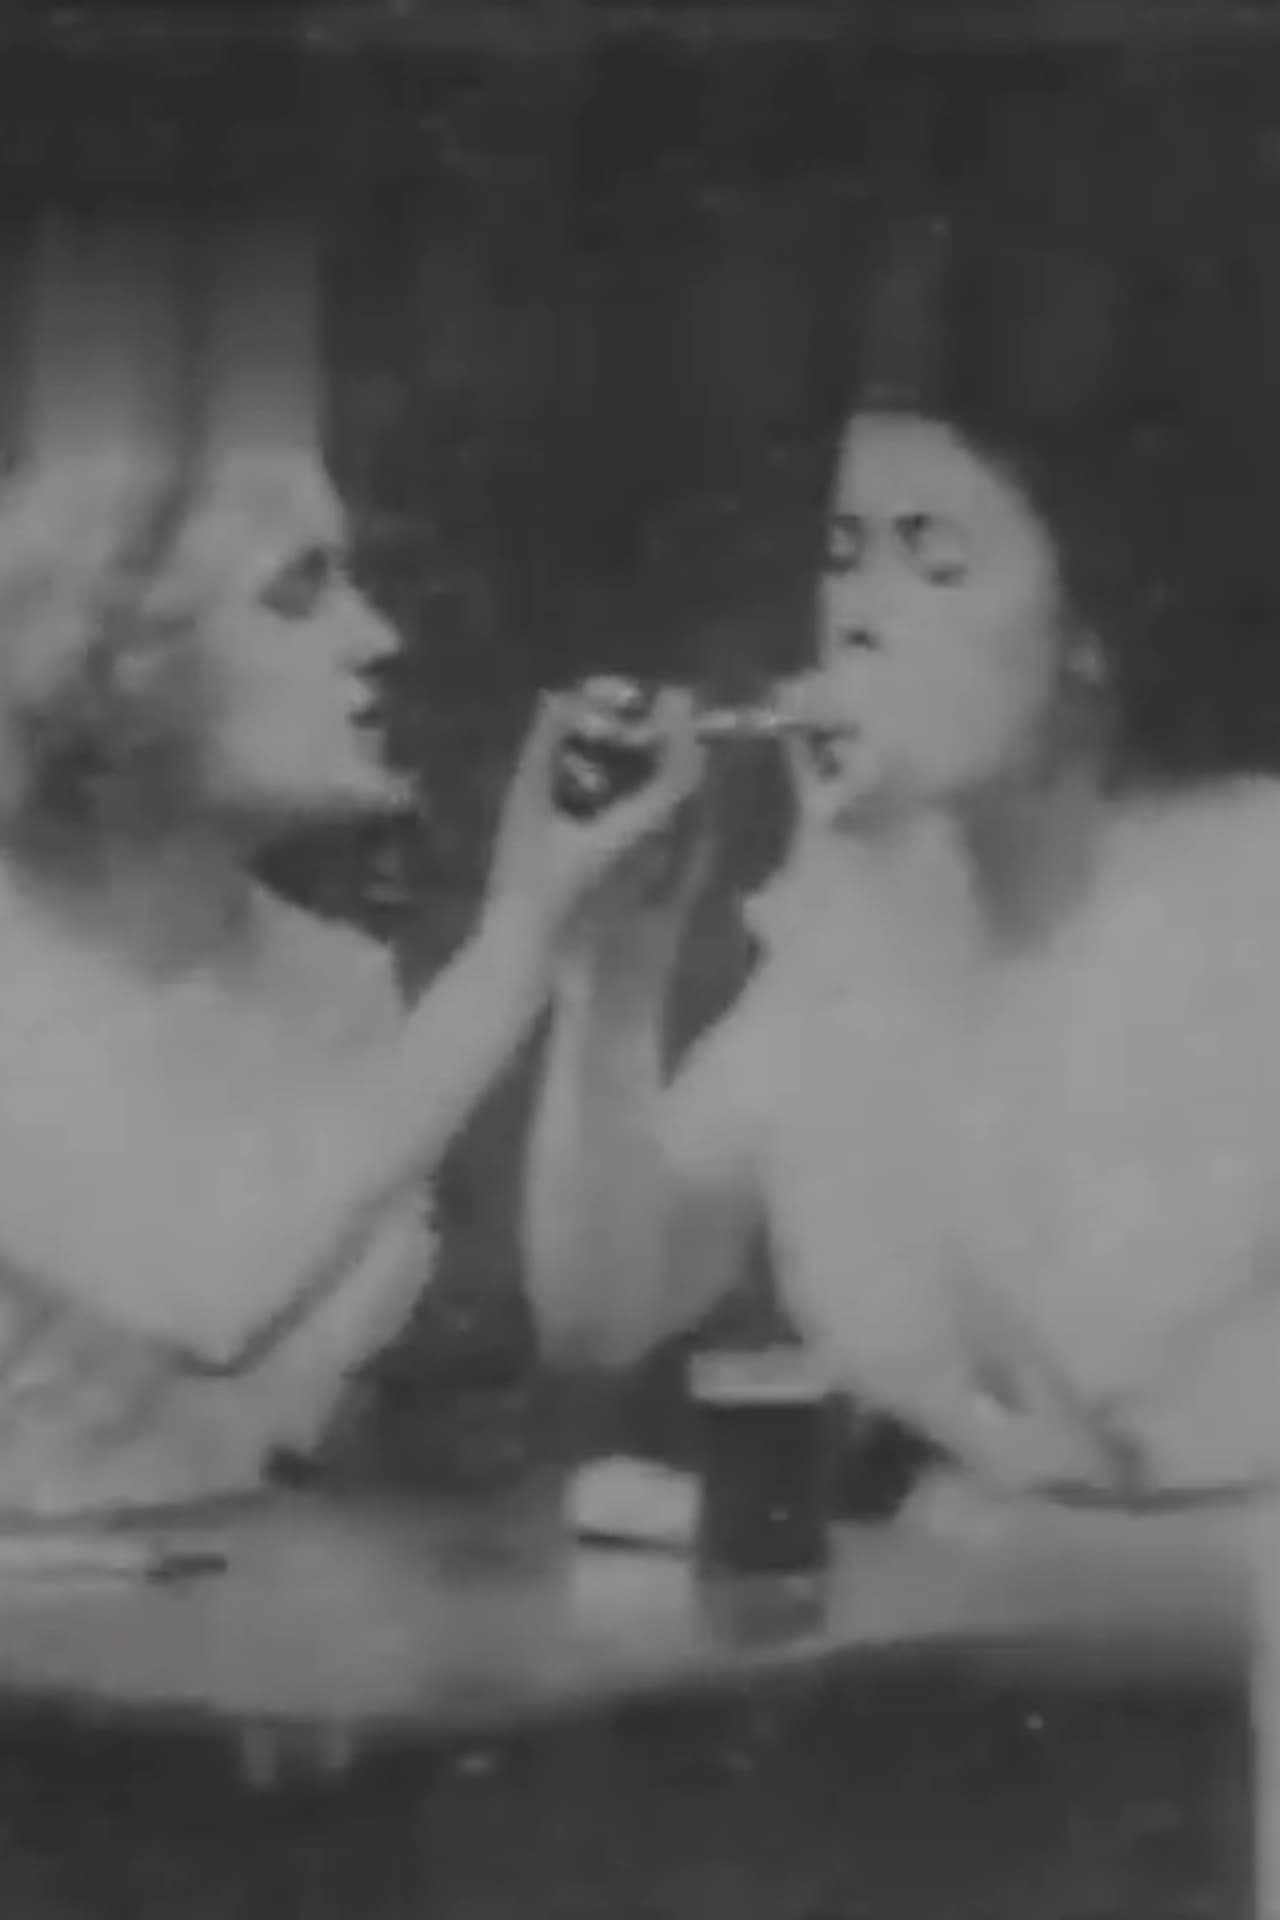 Her First Cigarette (1899)